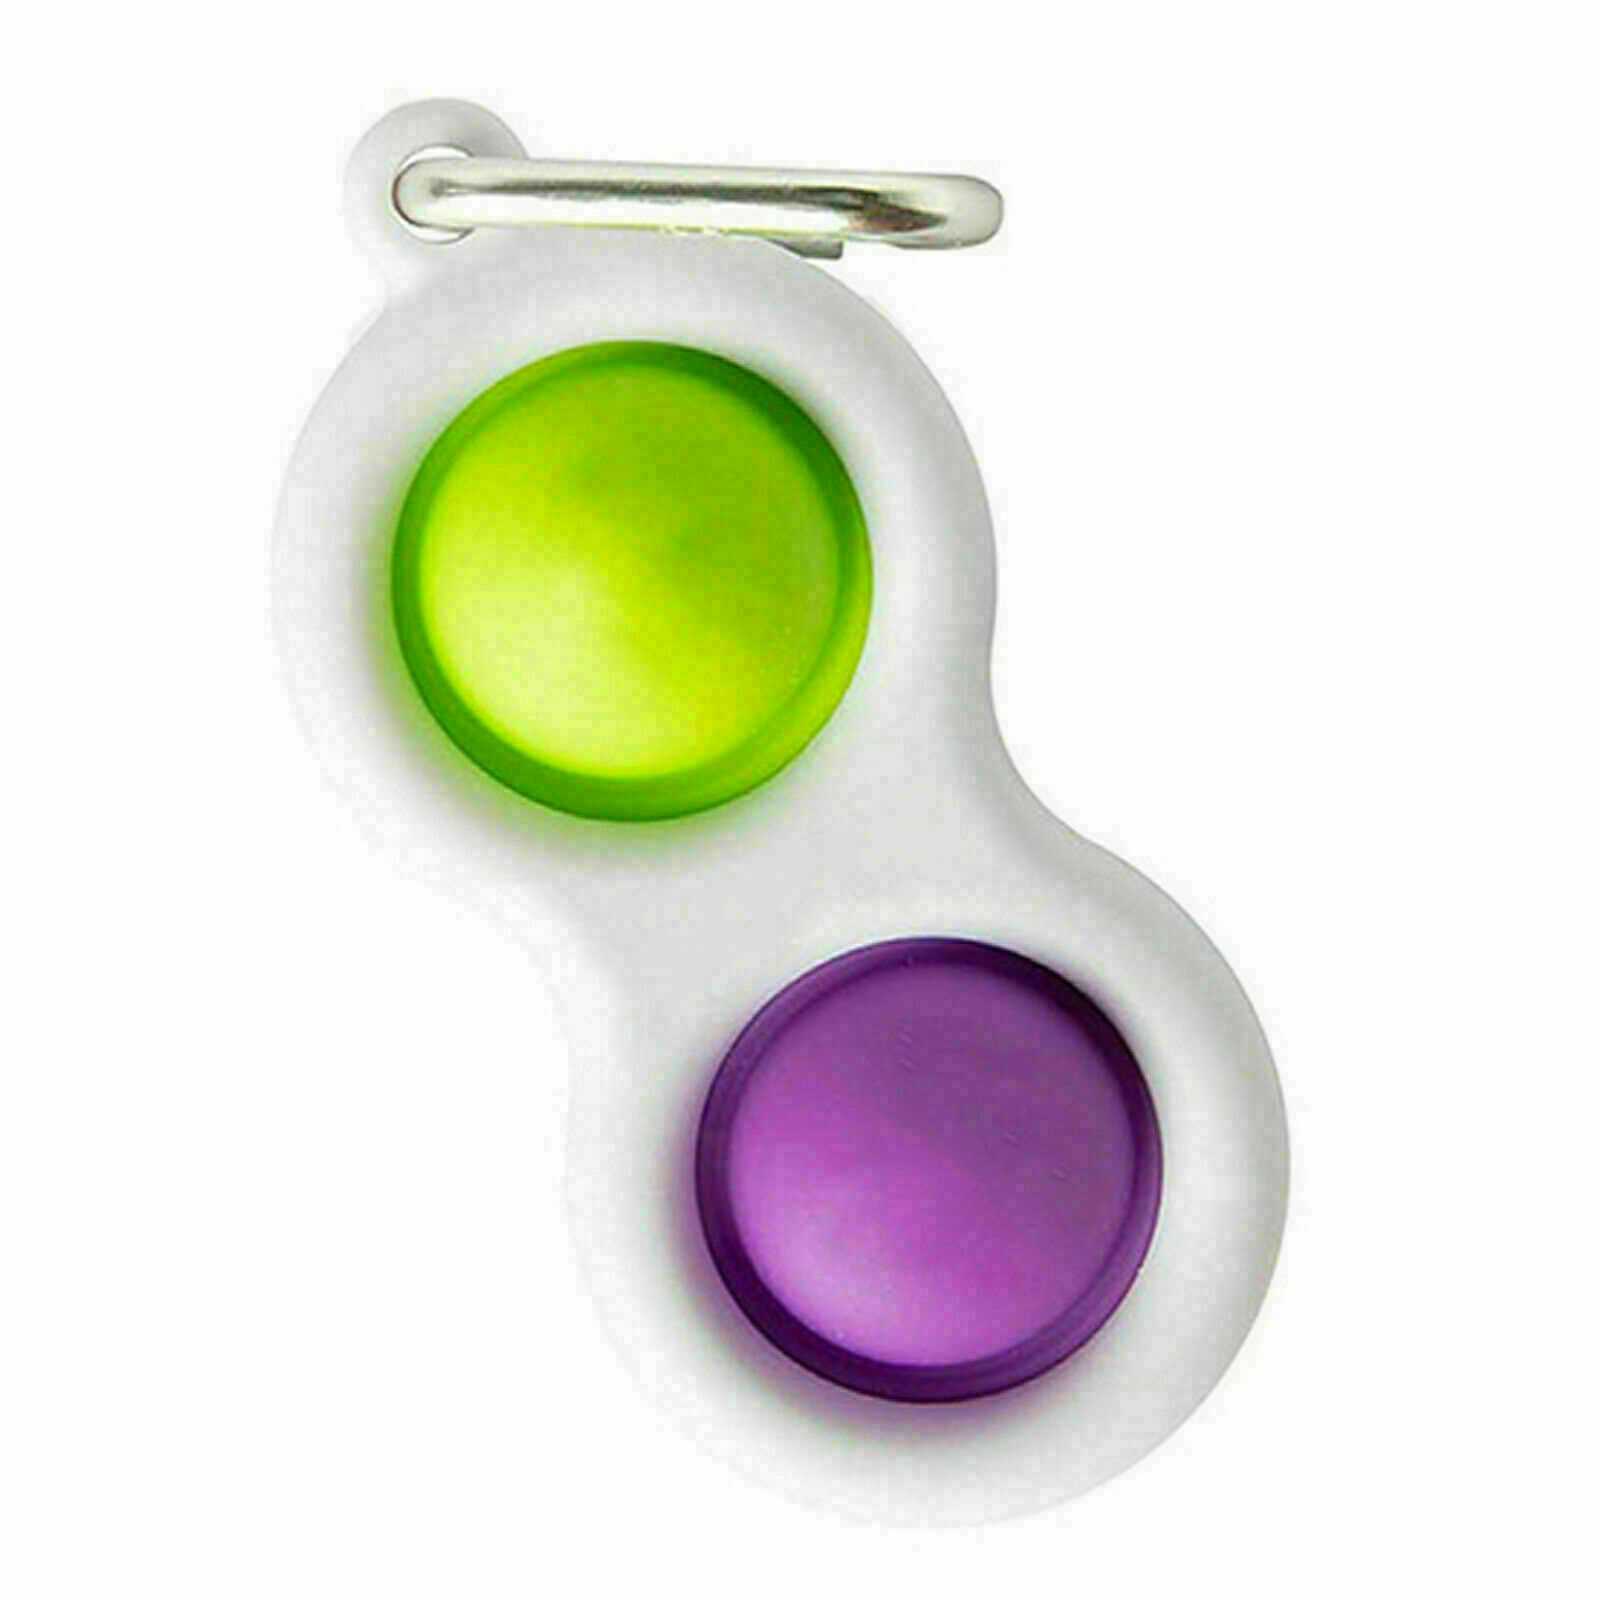 Green and Purple Kid Simple Dimple Special Needs Silent Sensory Fidget Toy Autism Classroom Adult